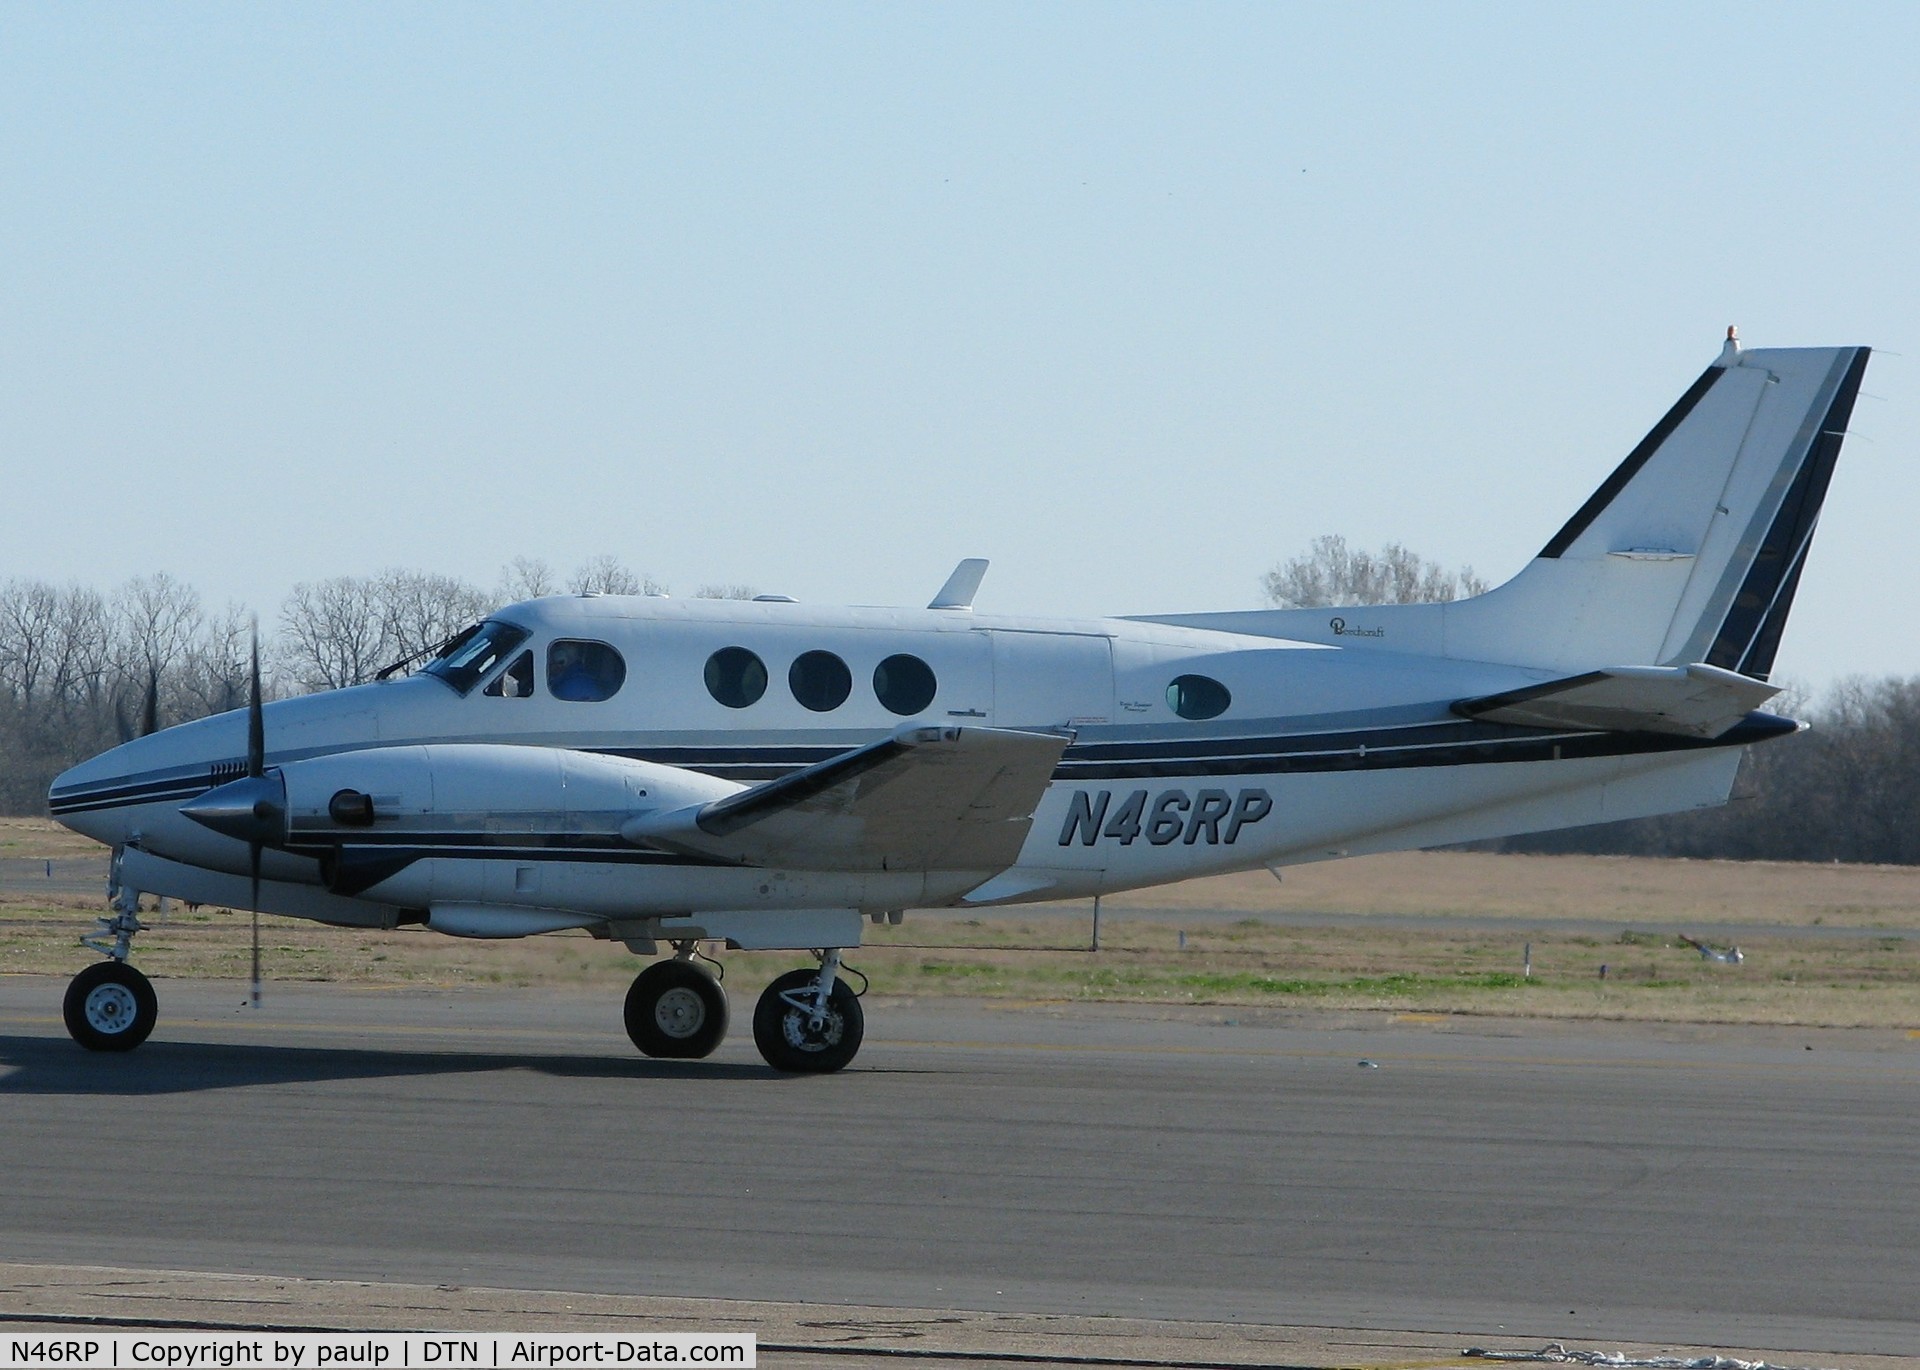 N46RP, 1976 Beech E-90 King Air C/N LW-193, Parking at the Downtown Shreveport airport.